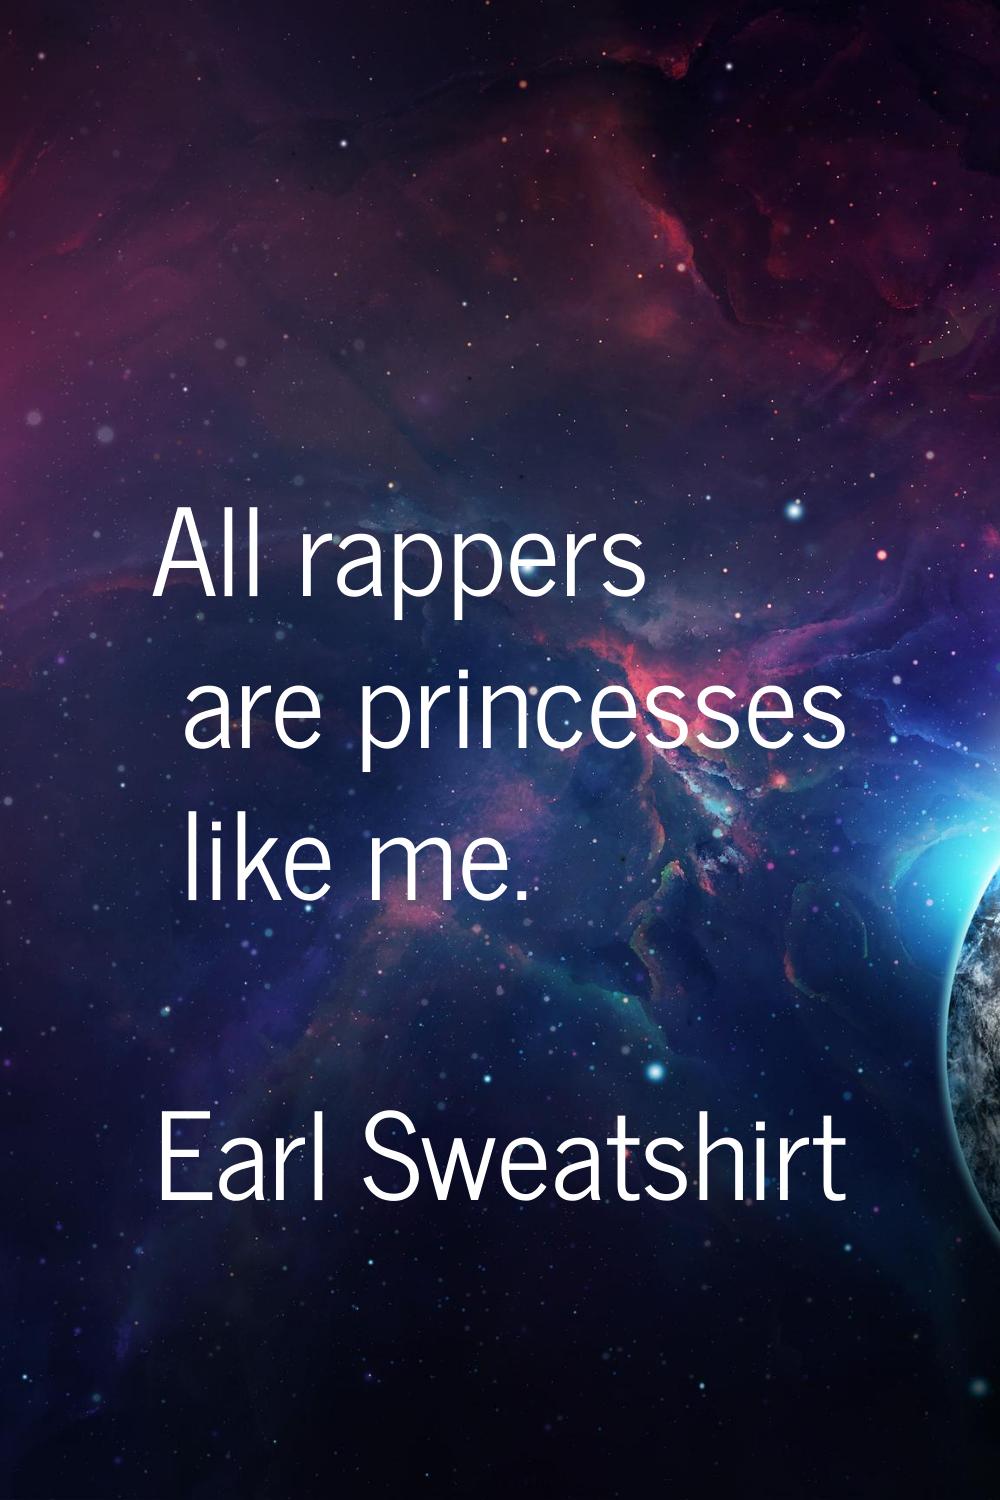 All rappers are princesses like me.